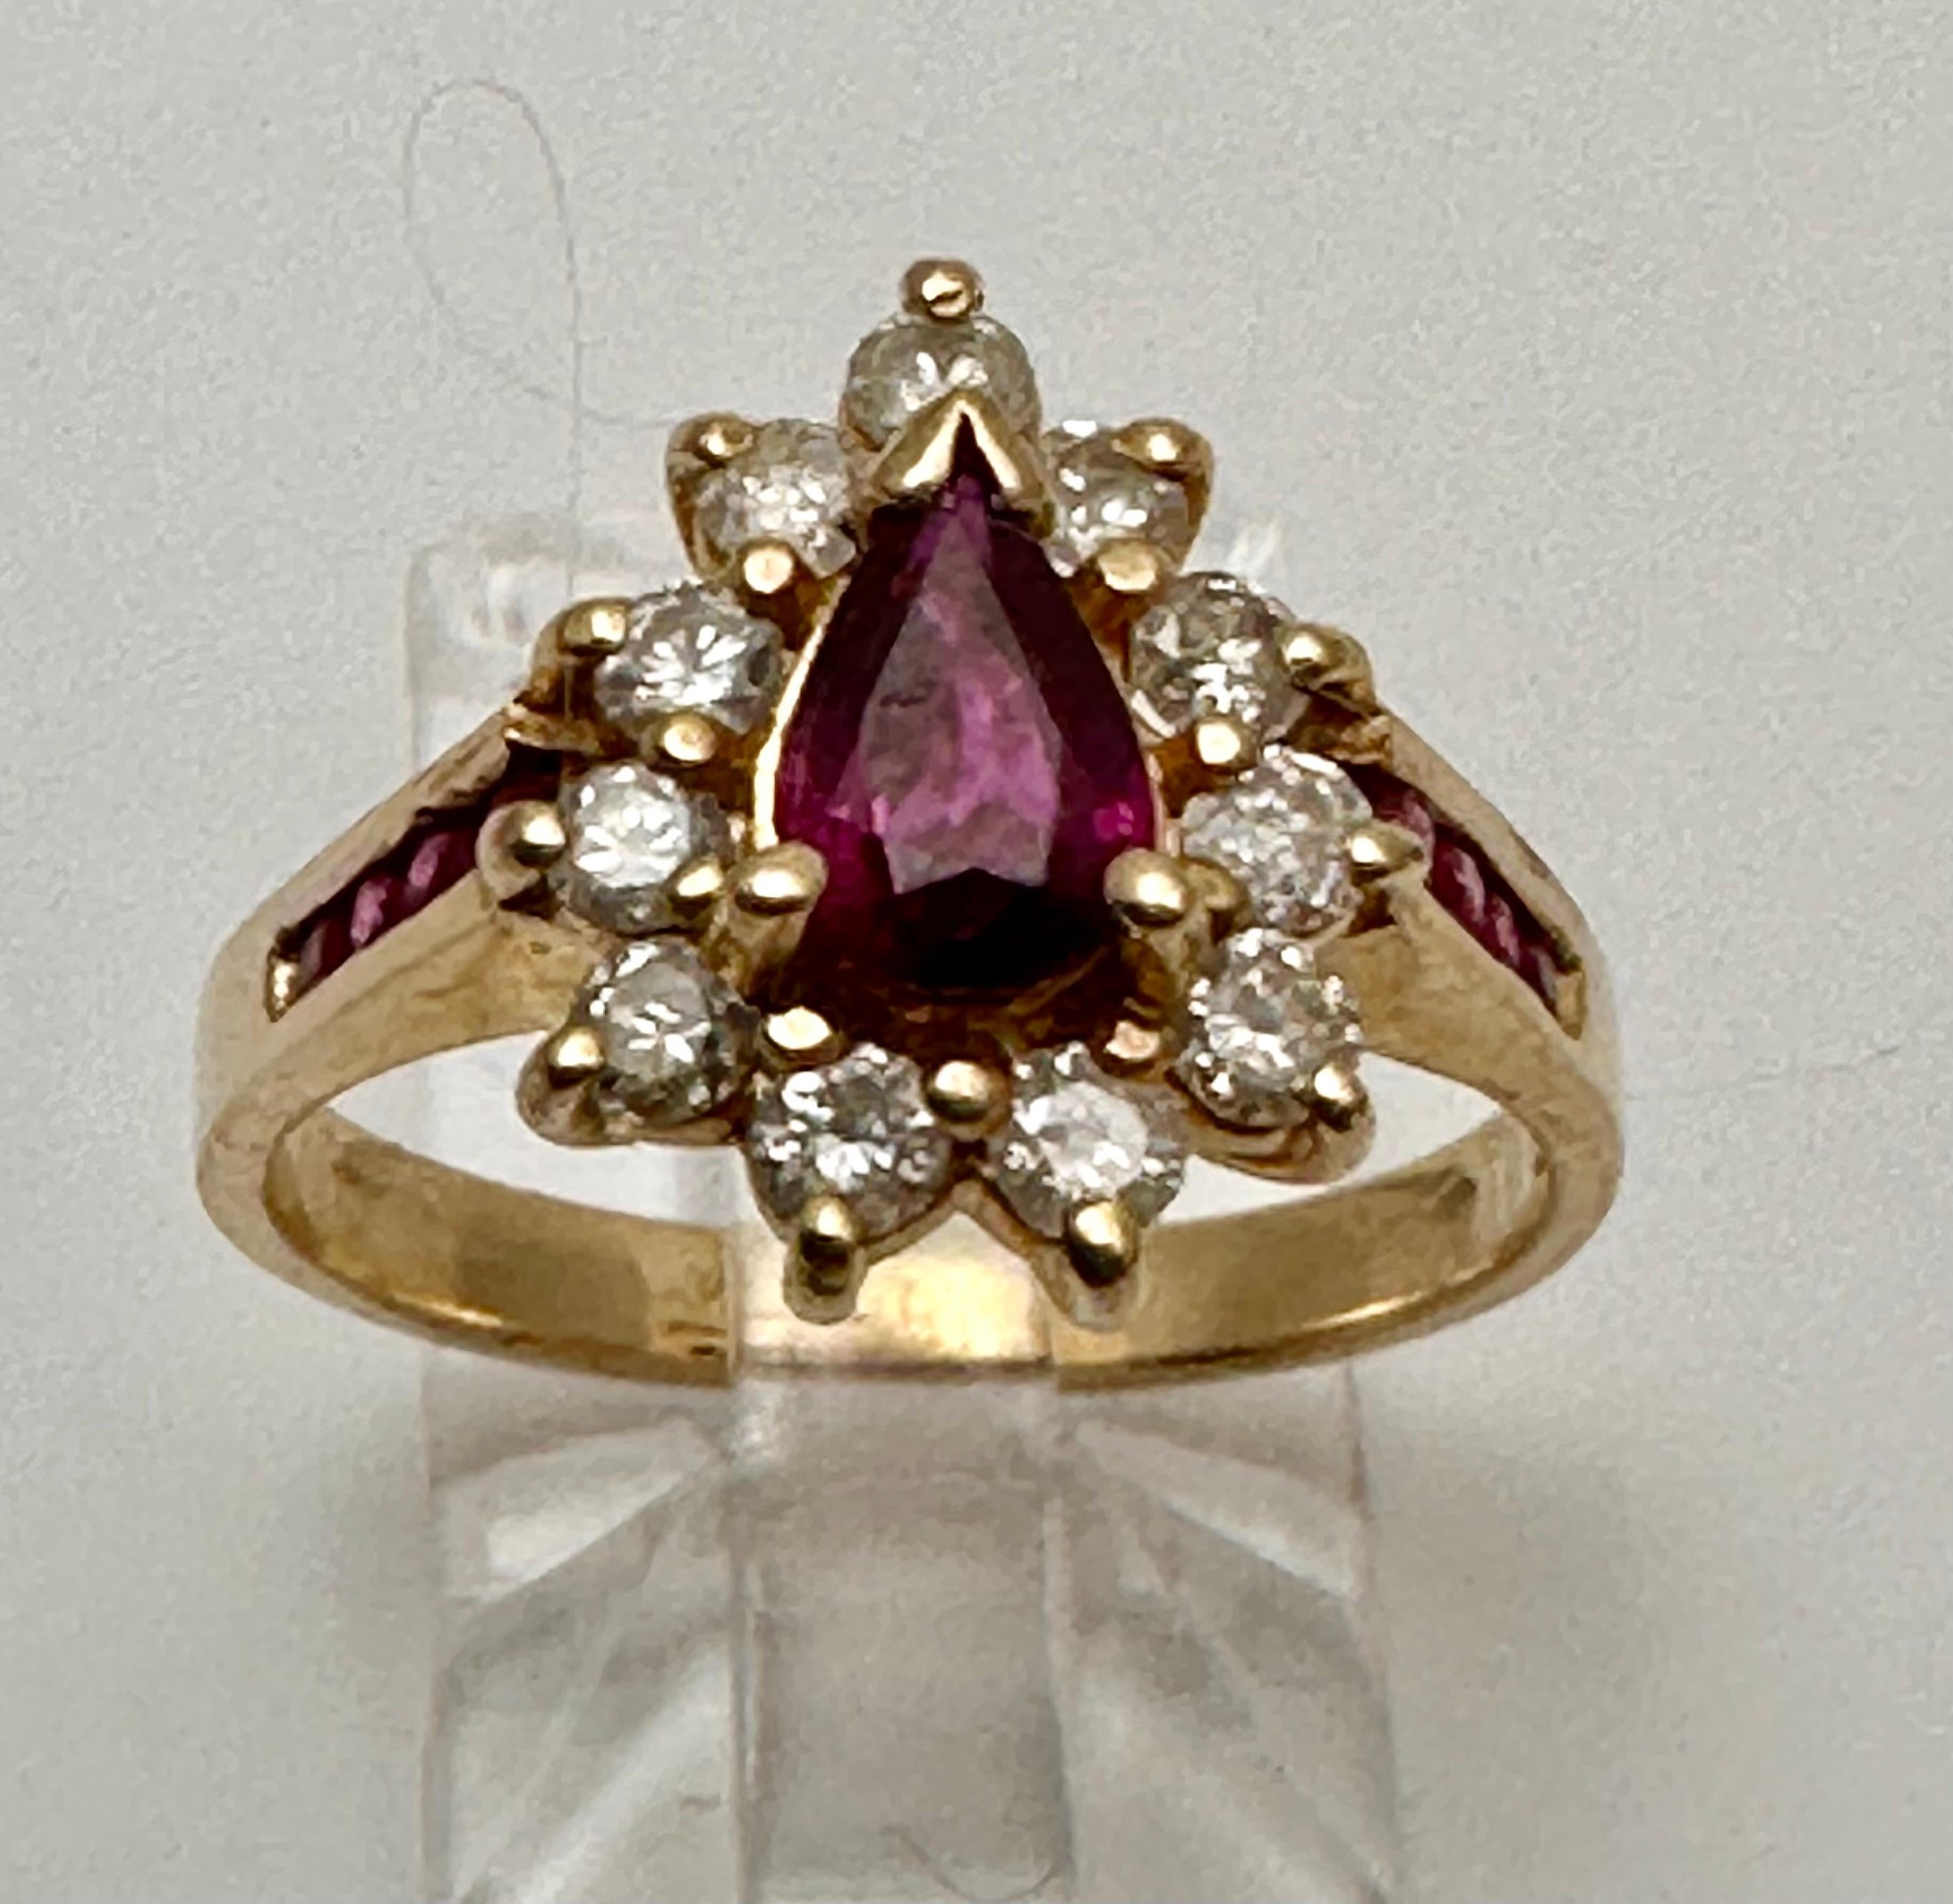 14k Yellow Gold 5mm x 7mm Pear Shape Ruby w/Surrounding Diamonds Ring Sz 6 1/2 In New Condition For Sale In Las Vegas, NV